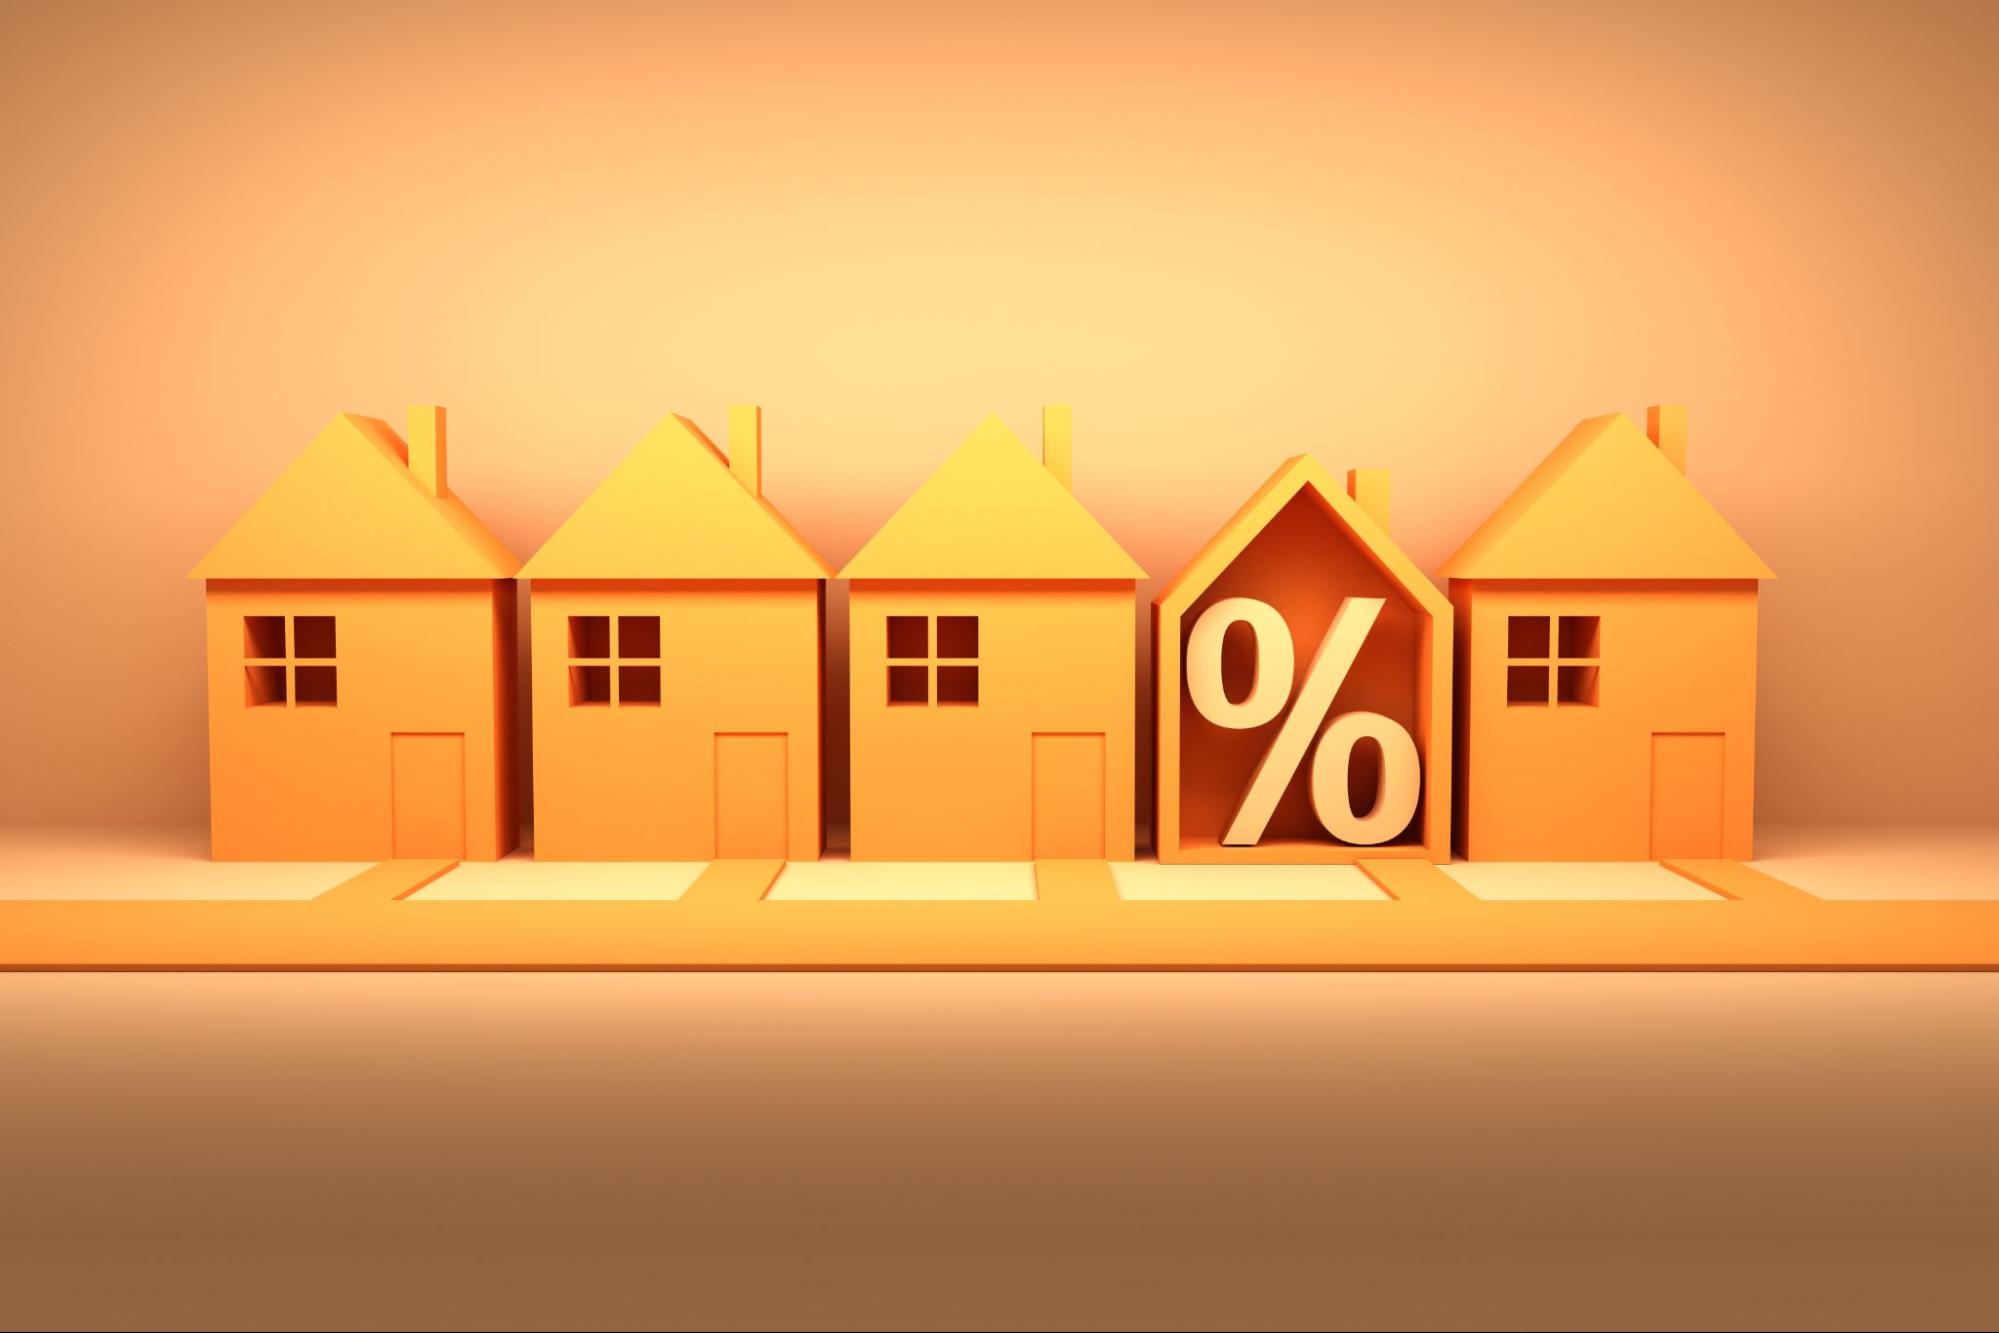 A row of 5 house cut outs with one open to show the percent symbol